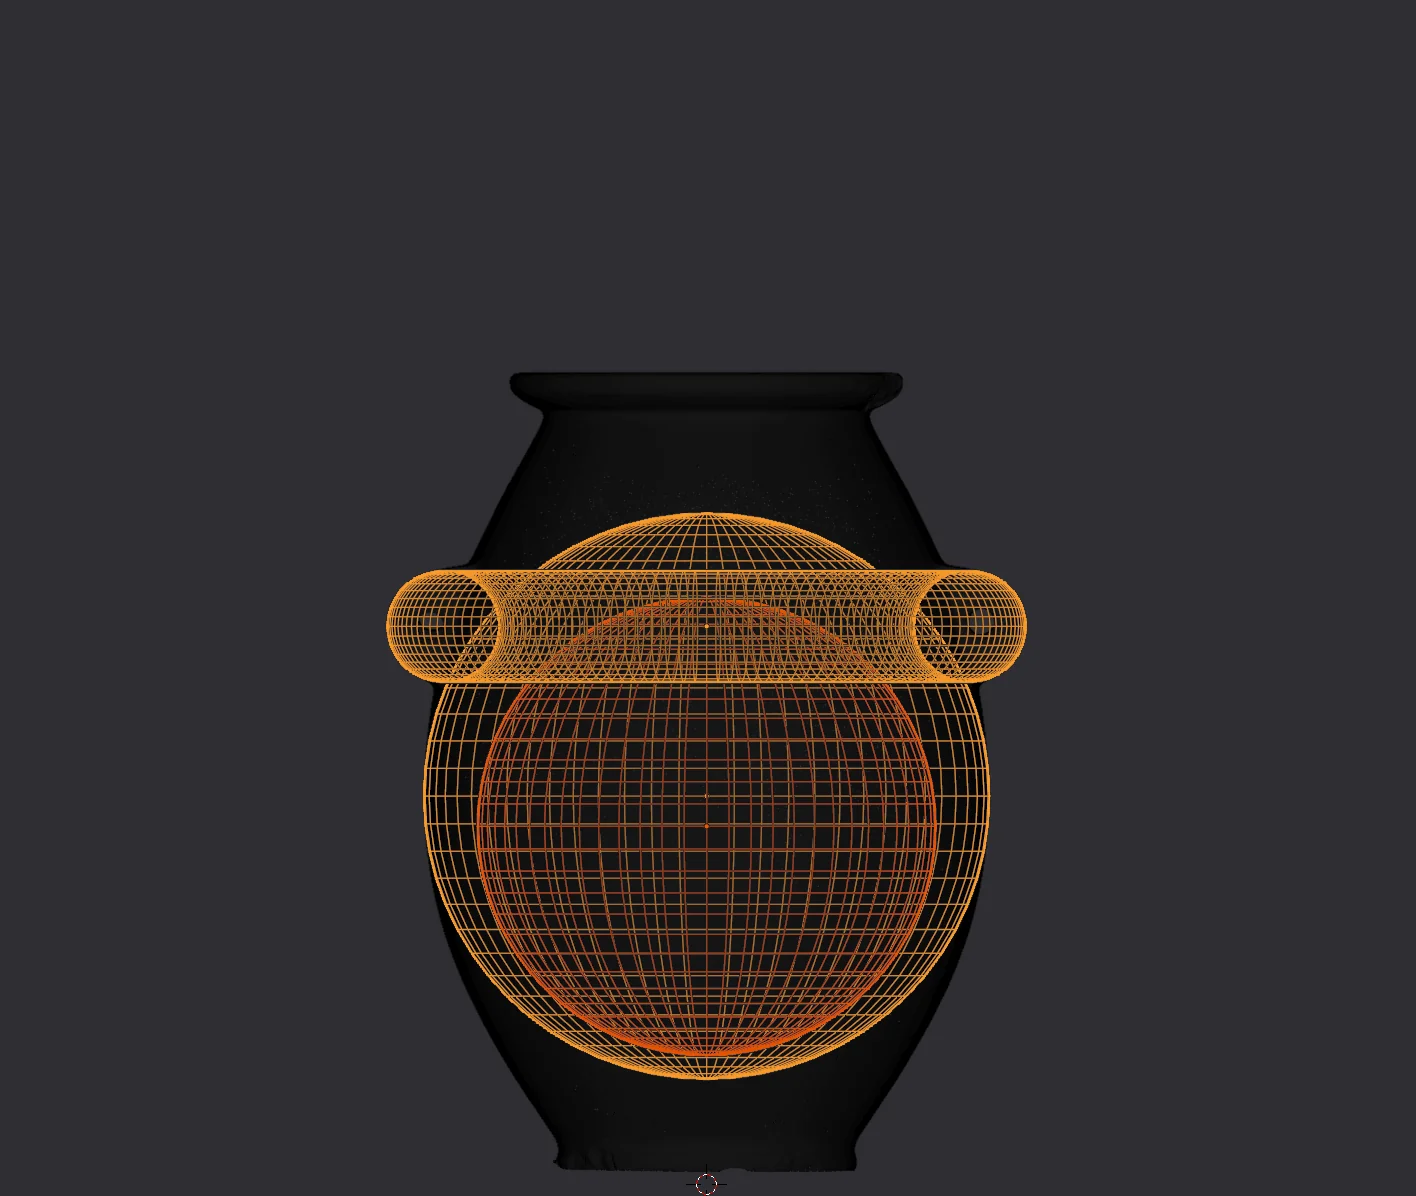 Image of vase and toroid